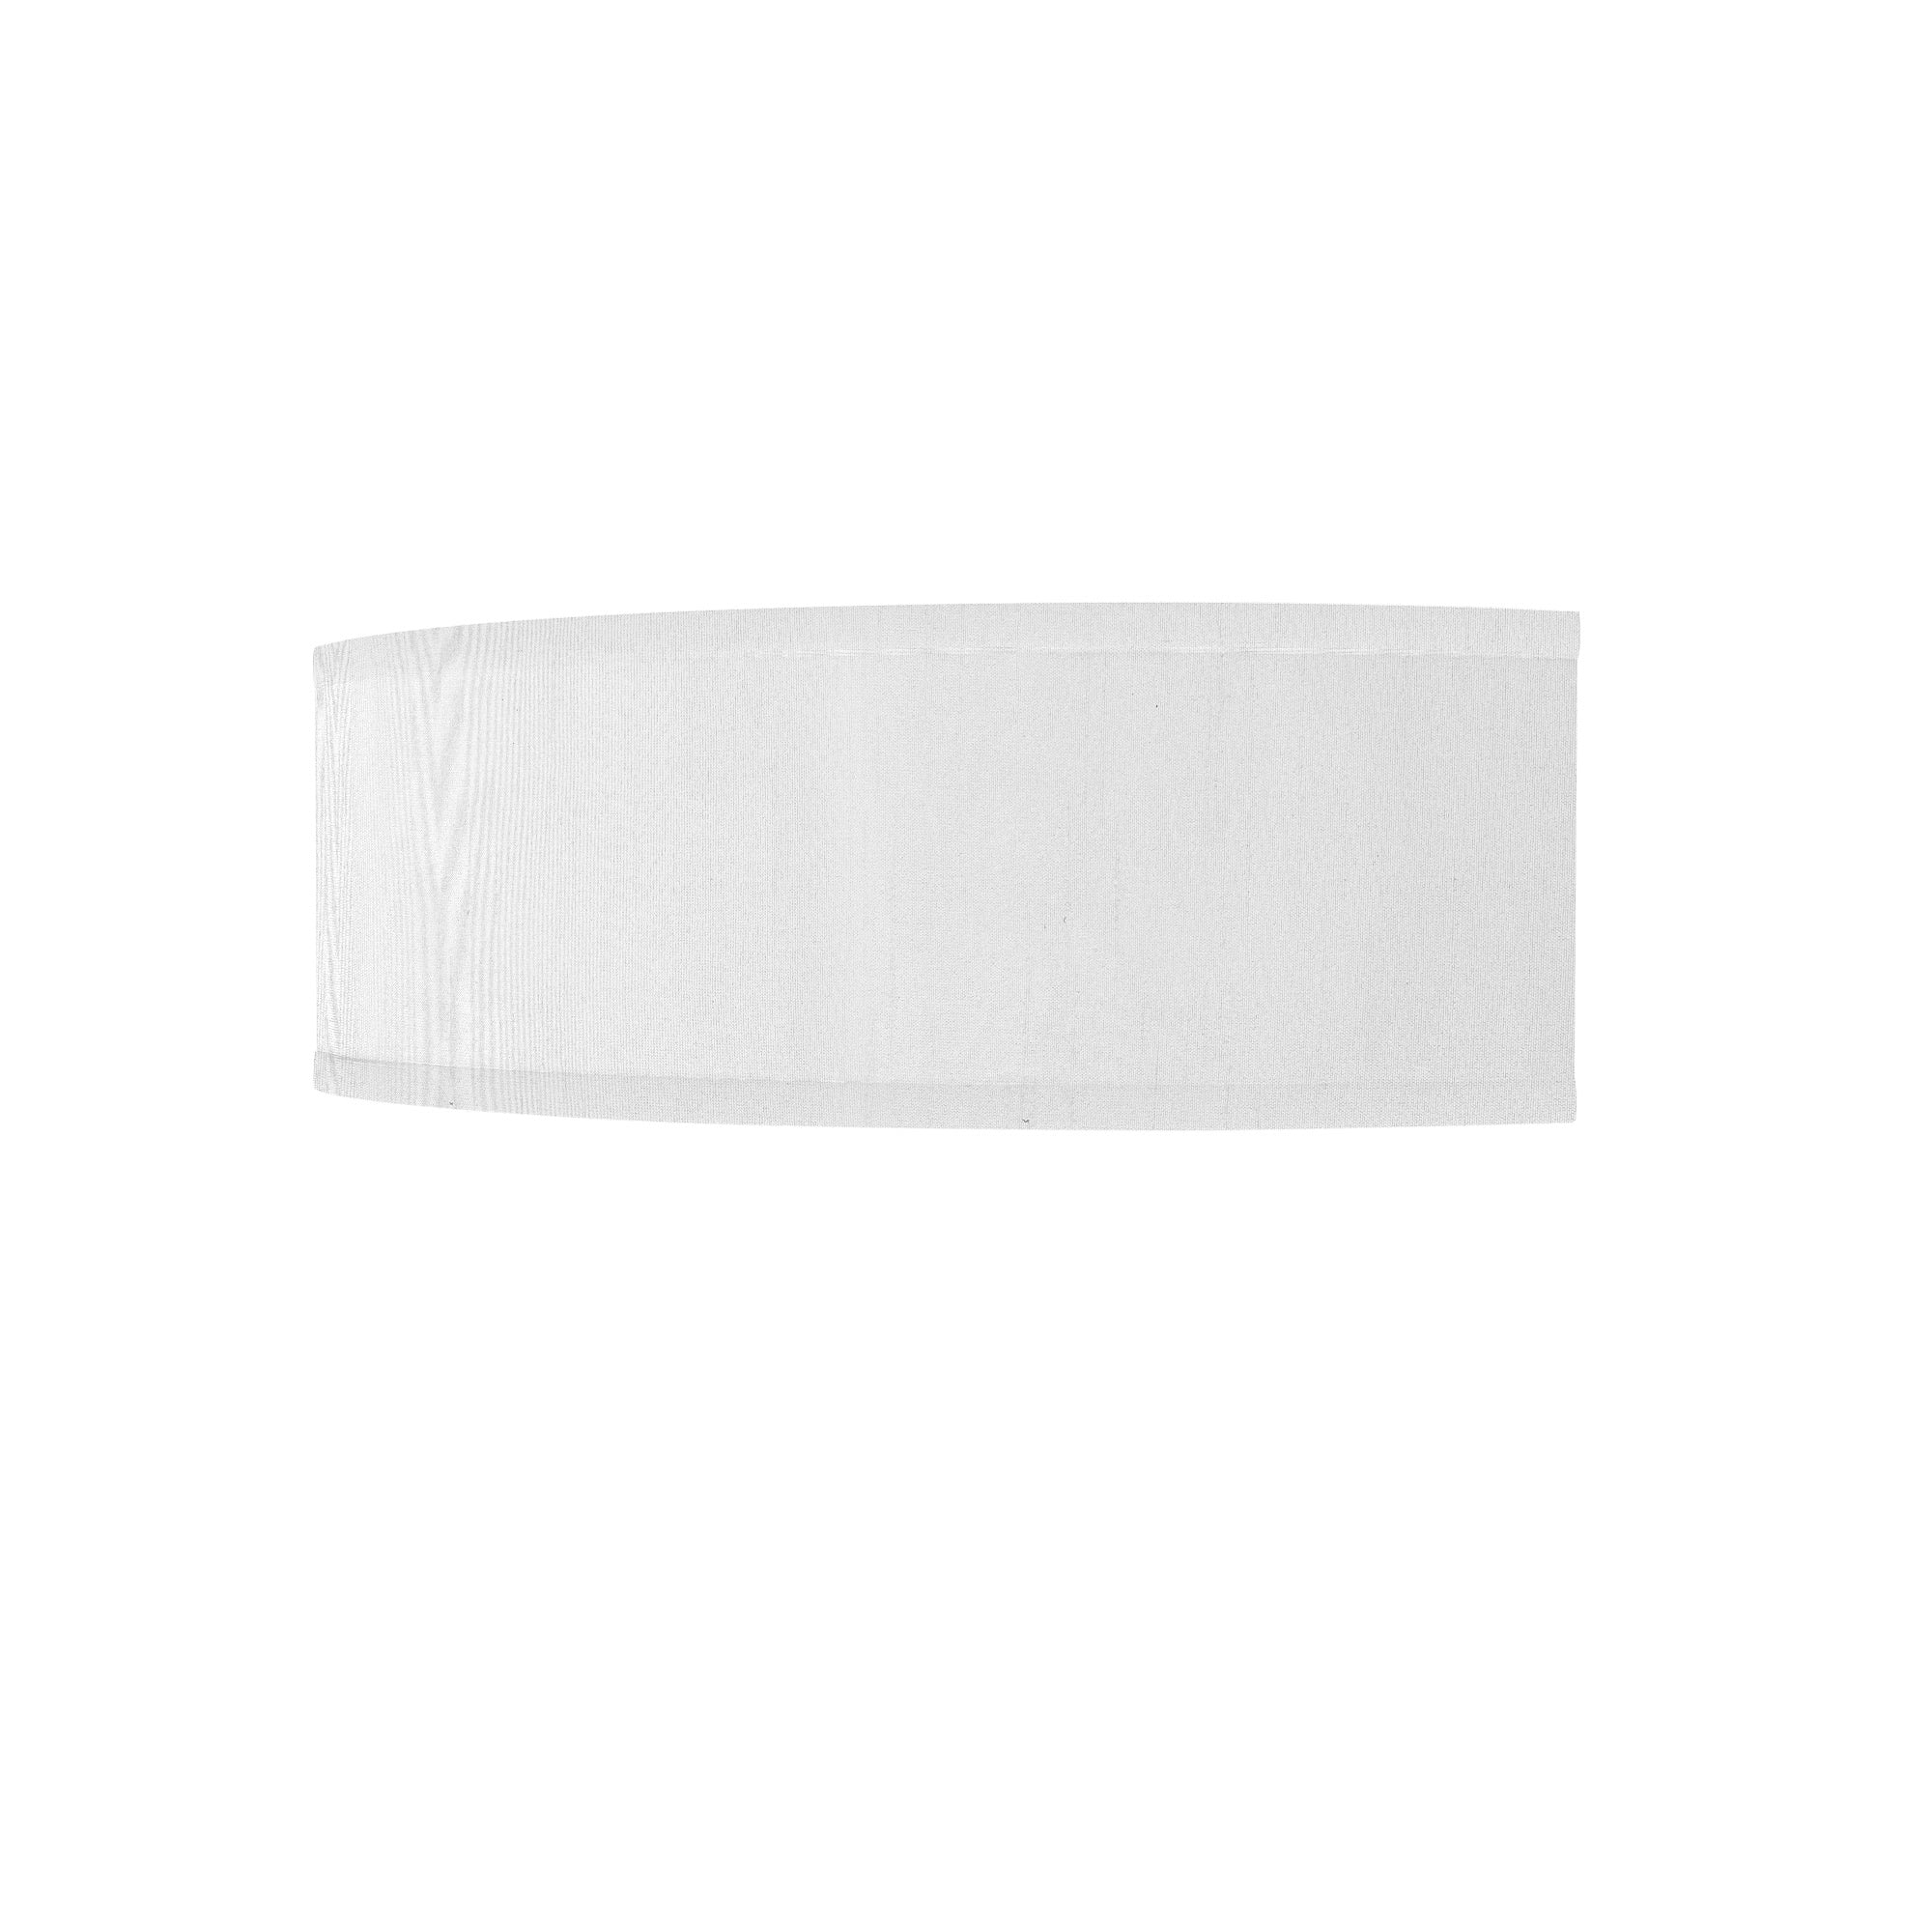 The Mora Wall Sconce from Seascape Fixtures with a silk shade in white color.